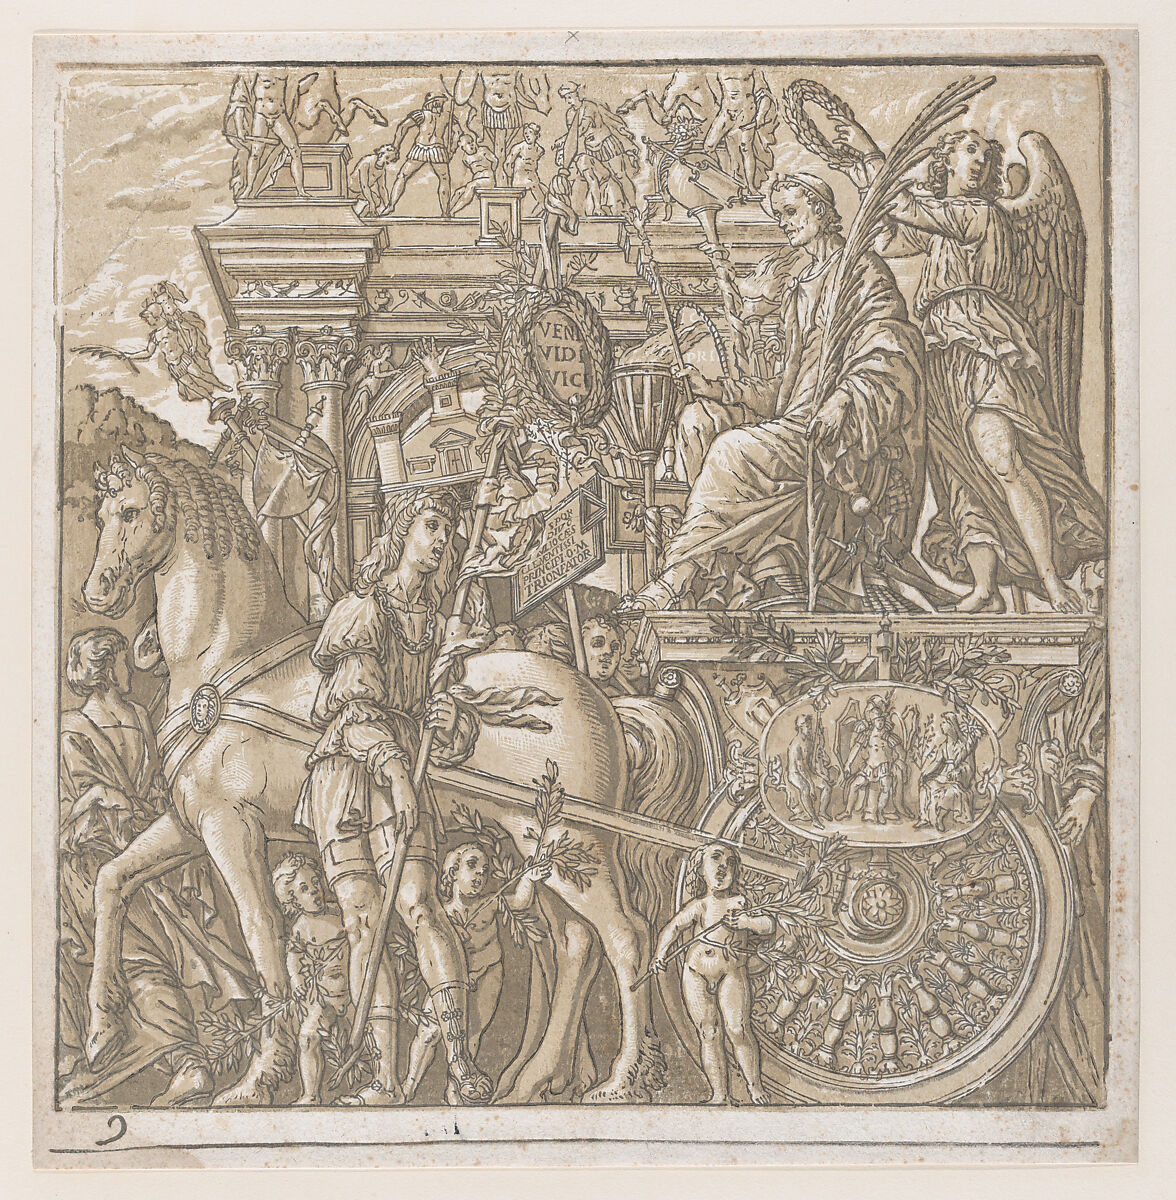 Sheet 9: Julius Ceasar in his horse-drawn chariot, from "The Triumph of Julius Caesar", Andrea Andreani (Italian, Mantua 1558/1559–1629), Chiaroscuro woodcut from four blocks in gray-green ink 